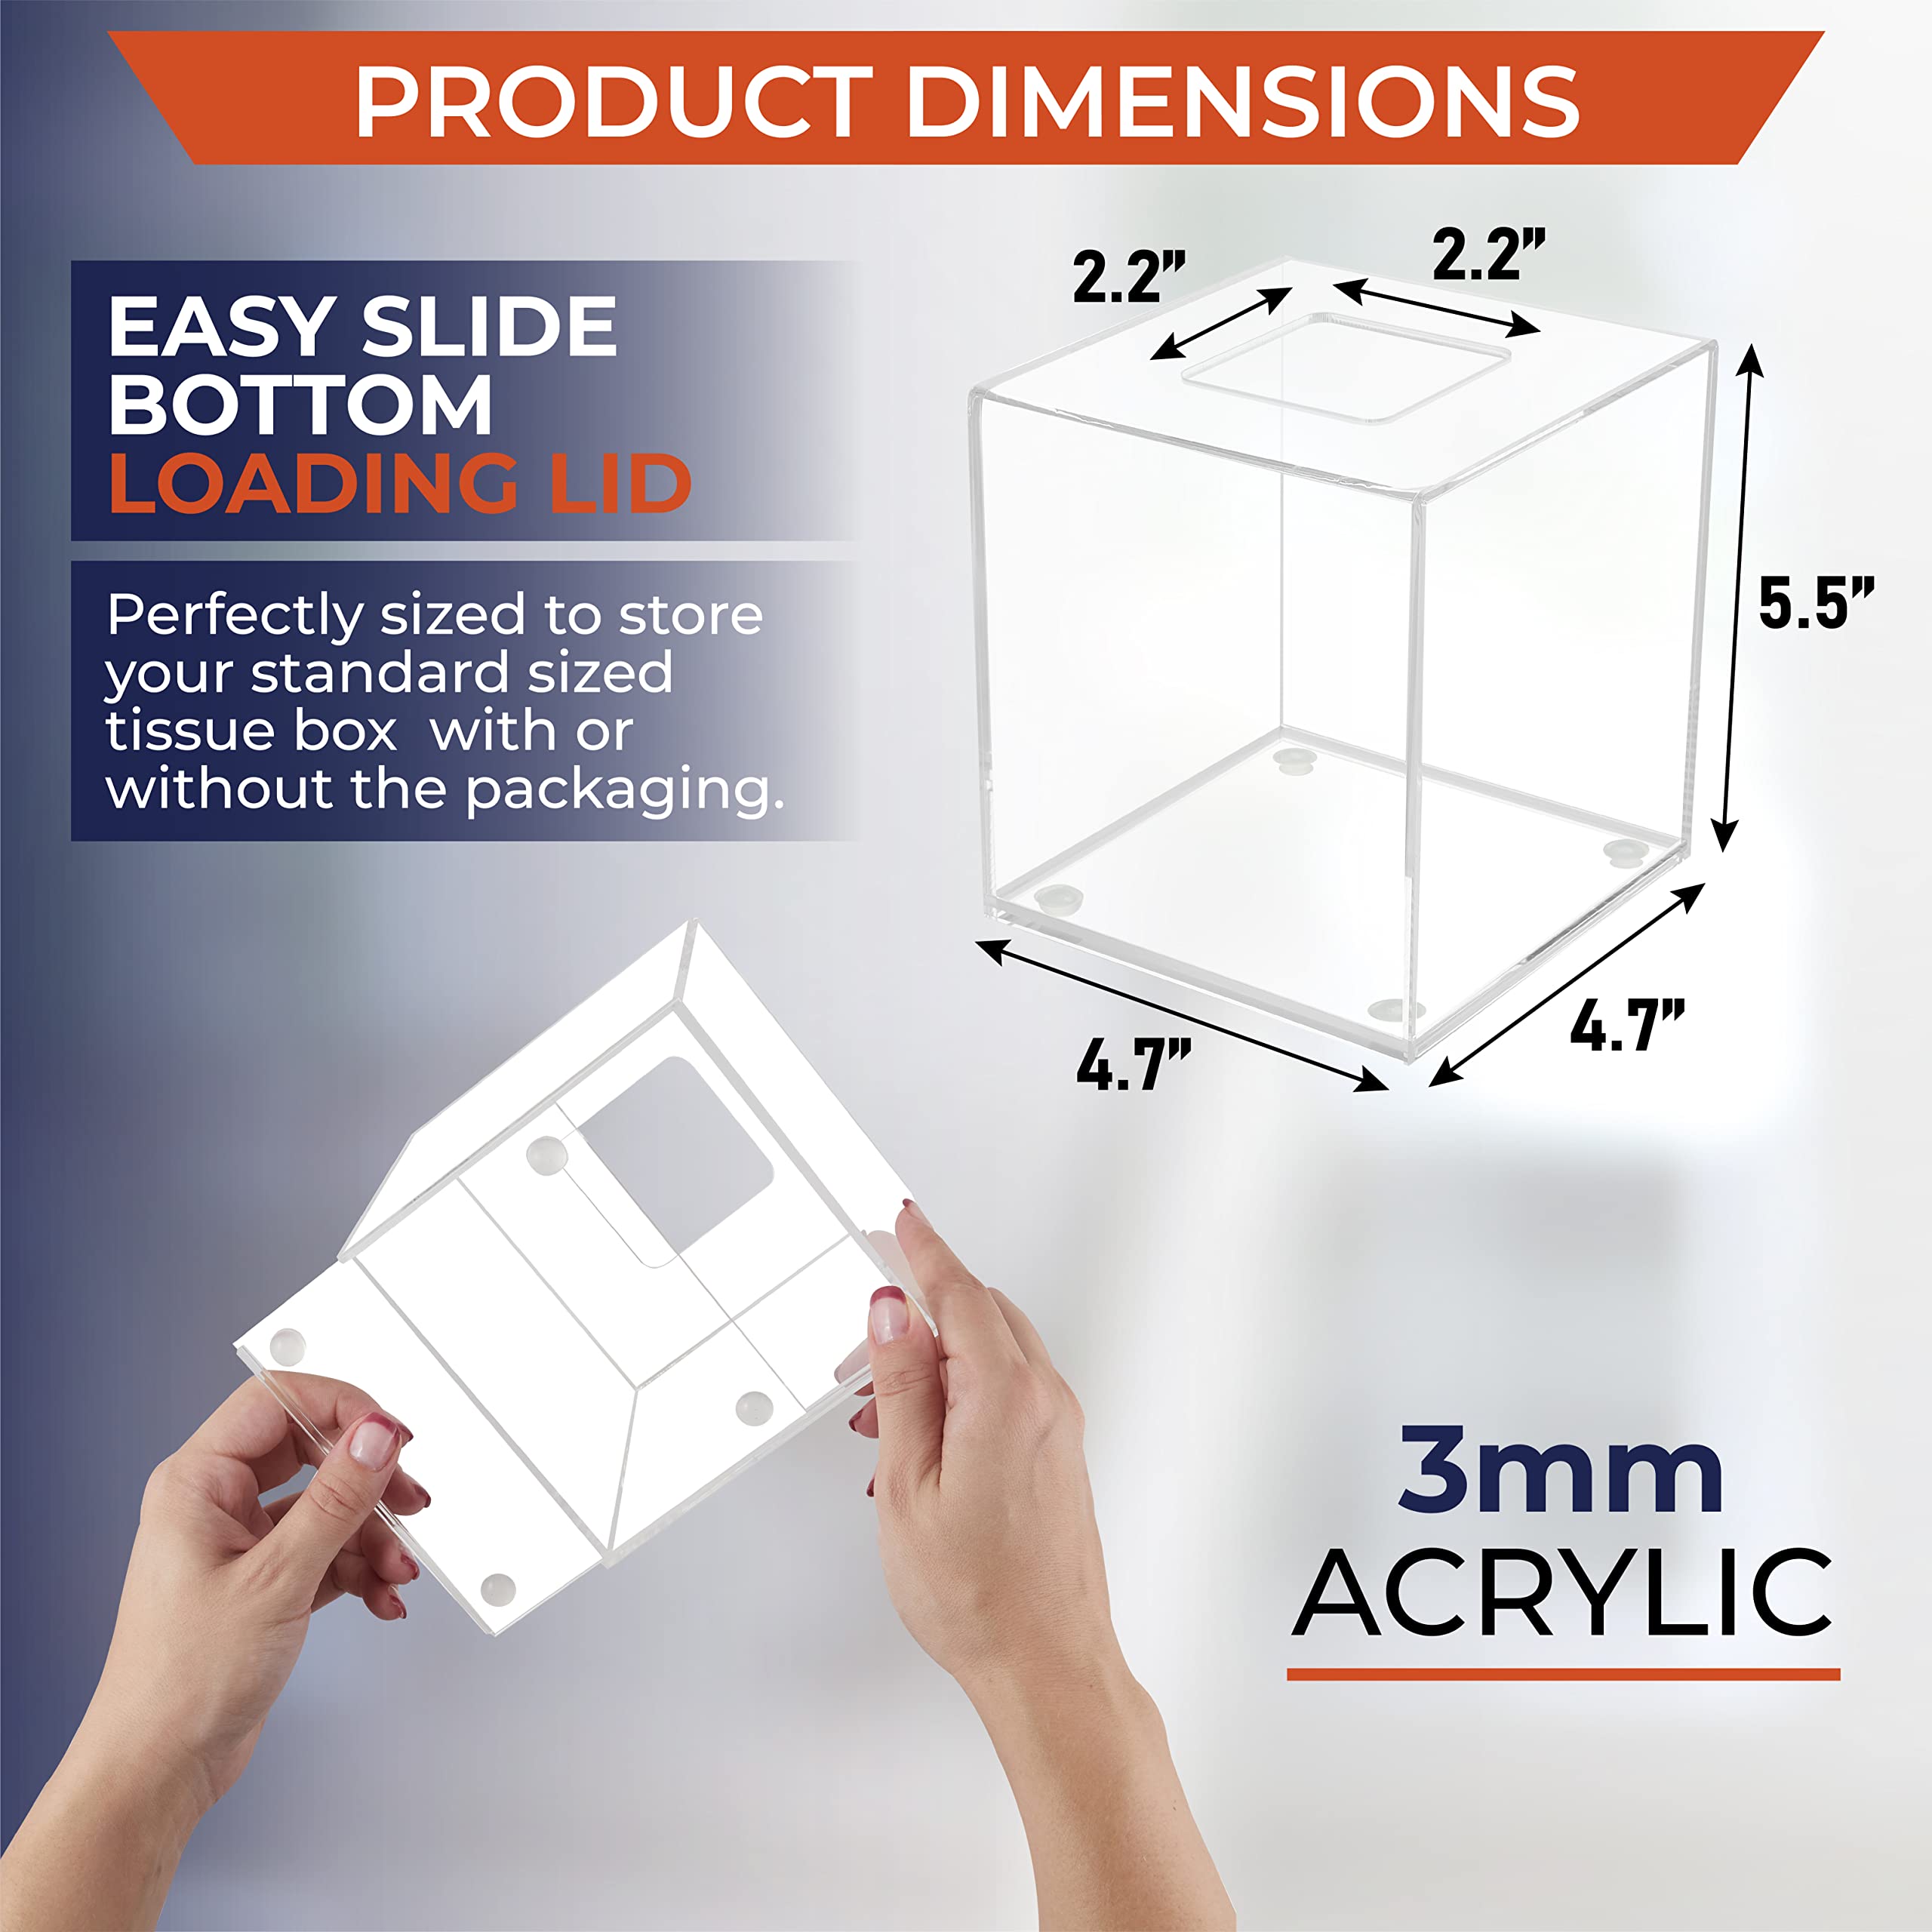 Acrylic Tissue Box Holder, Square Clear Tissue Box Dispenser for Facial Tissue, Napkins, Dryer Sheets. Perfect for Bathroom, Desks, Countertop, Vanity, Bedroom Dressers, Night Stands (Square, Clear)